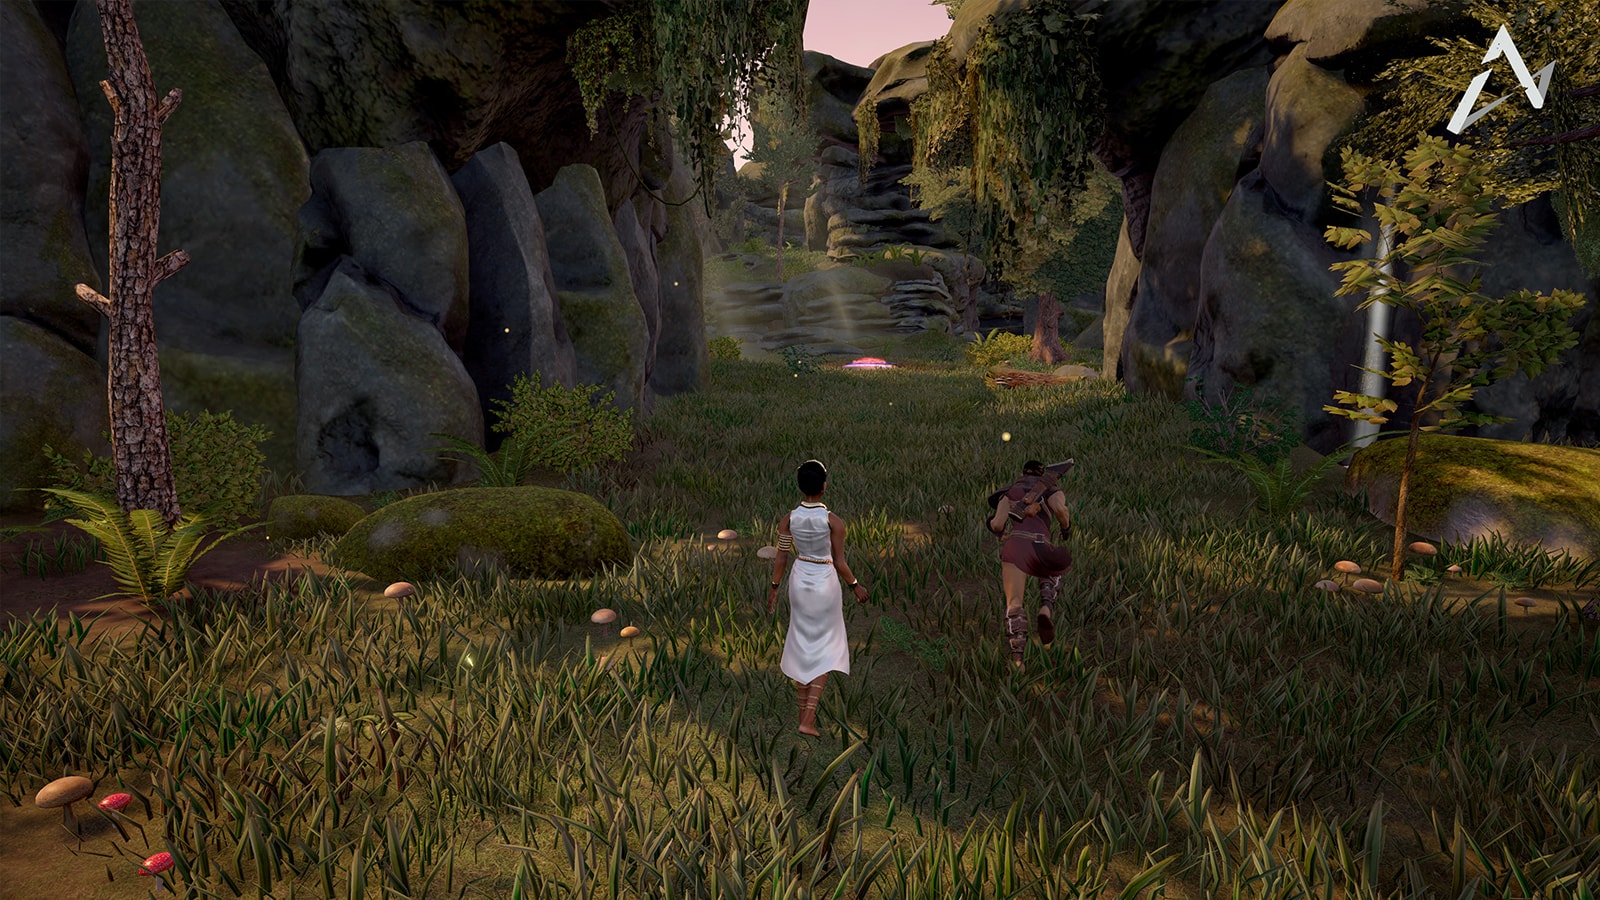 A woman in a white dress follows behind Orion as he begins to run down a sylvan pathway. 